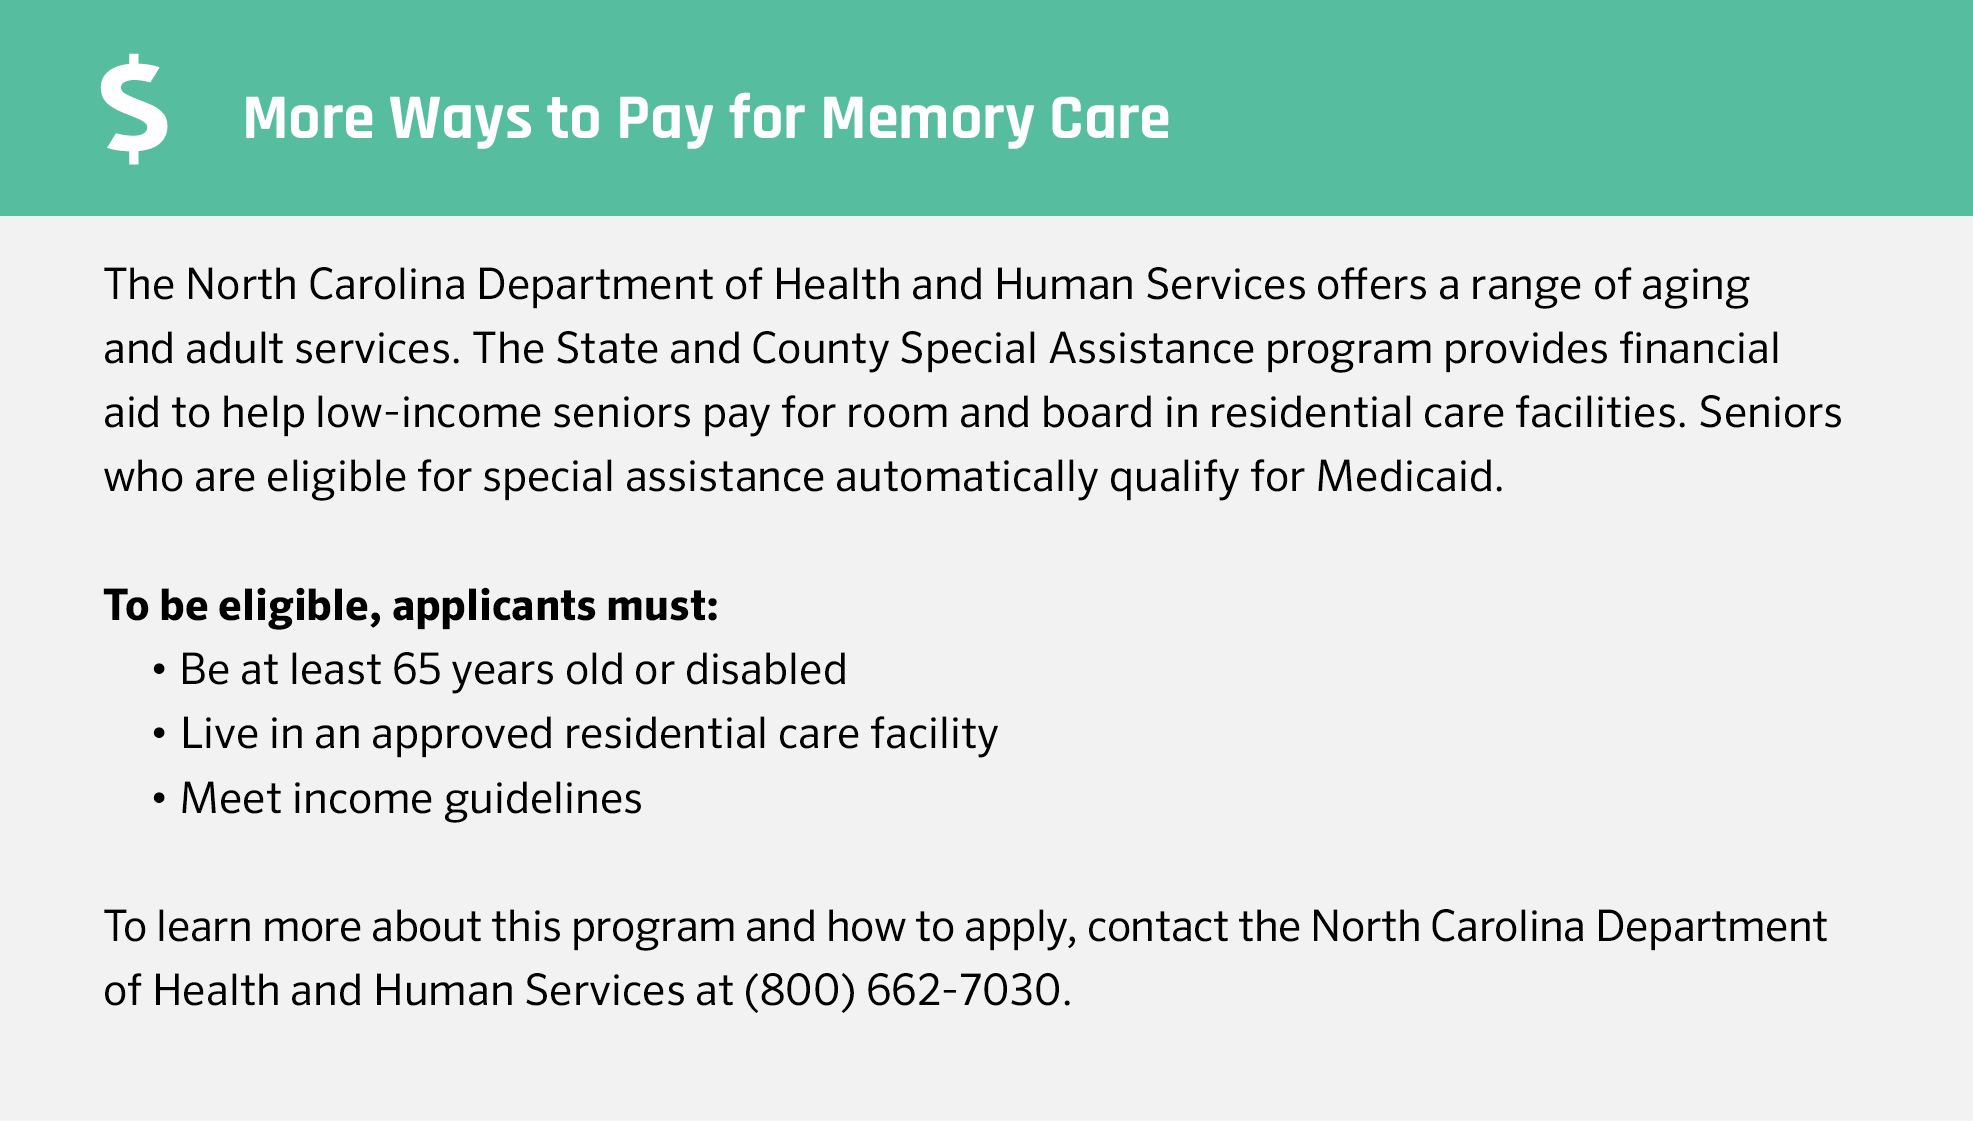 Financial Assistance for Memory Care in North Carolina